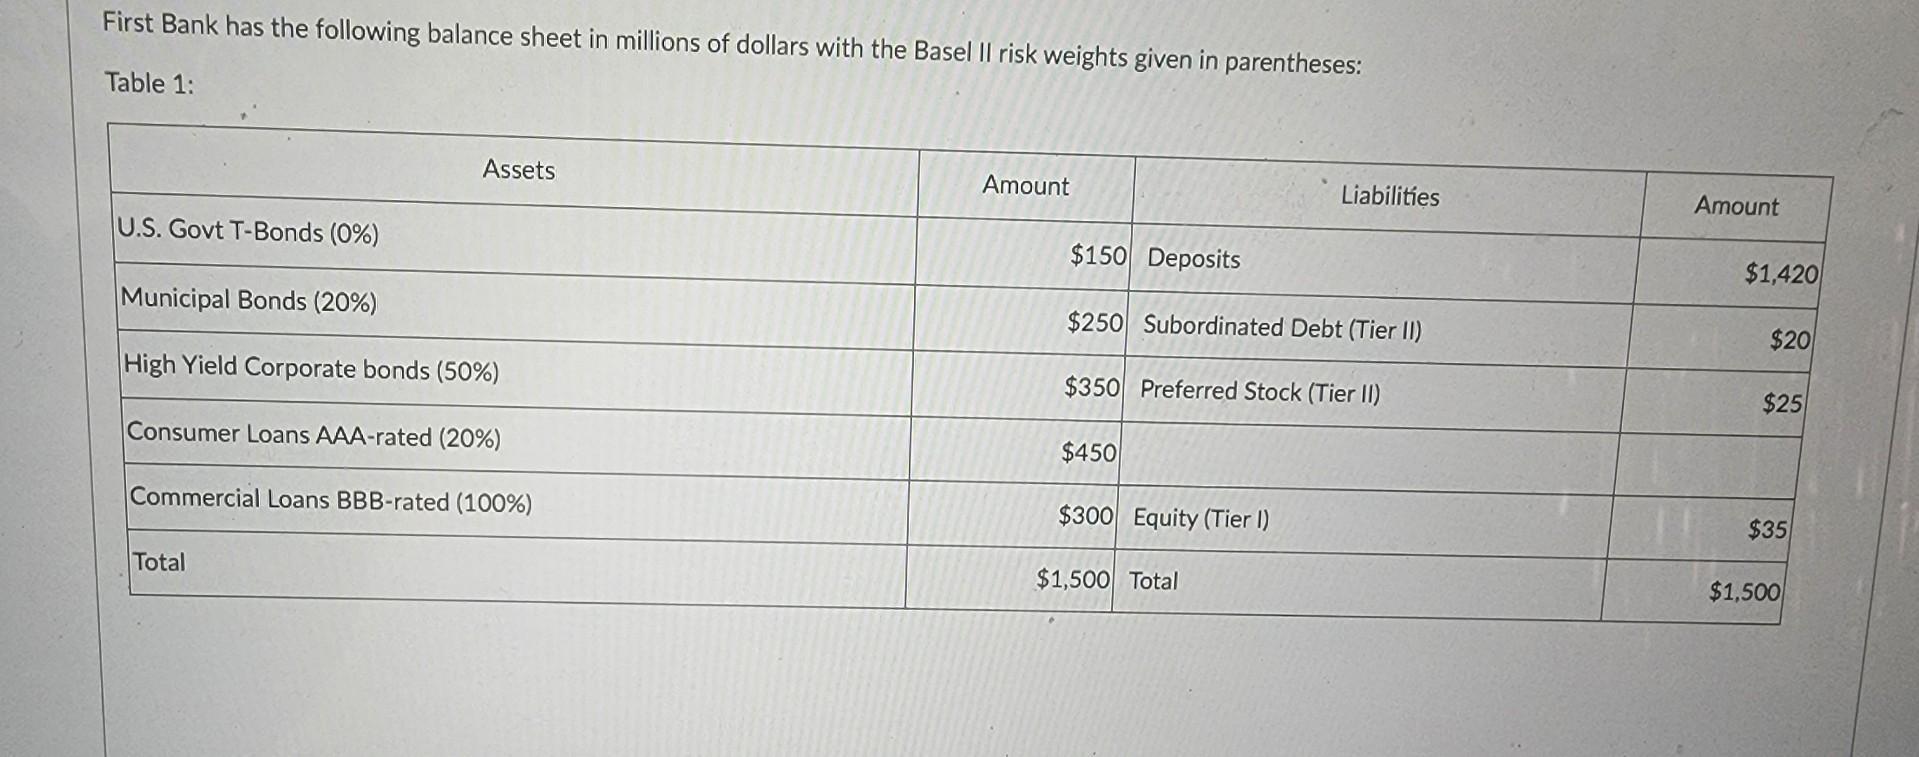 First Bank has the following balance sheet in millions of dollars with the Basel II risk weights given in parentheses: Table